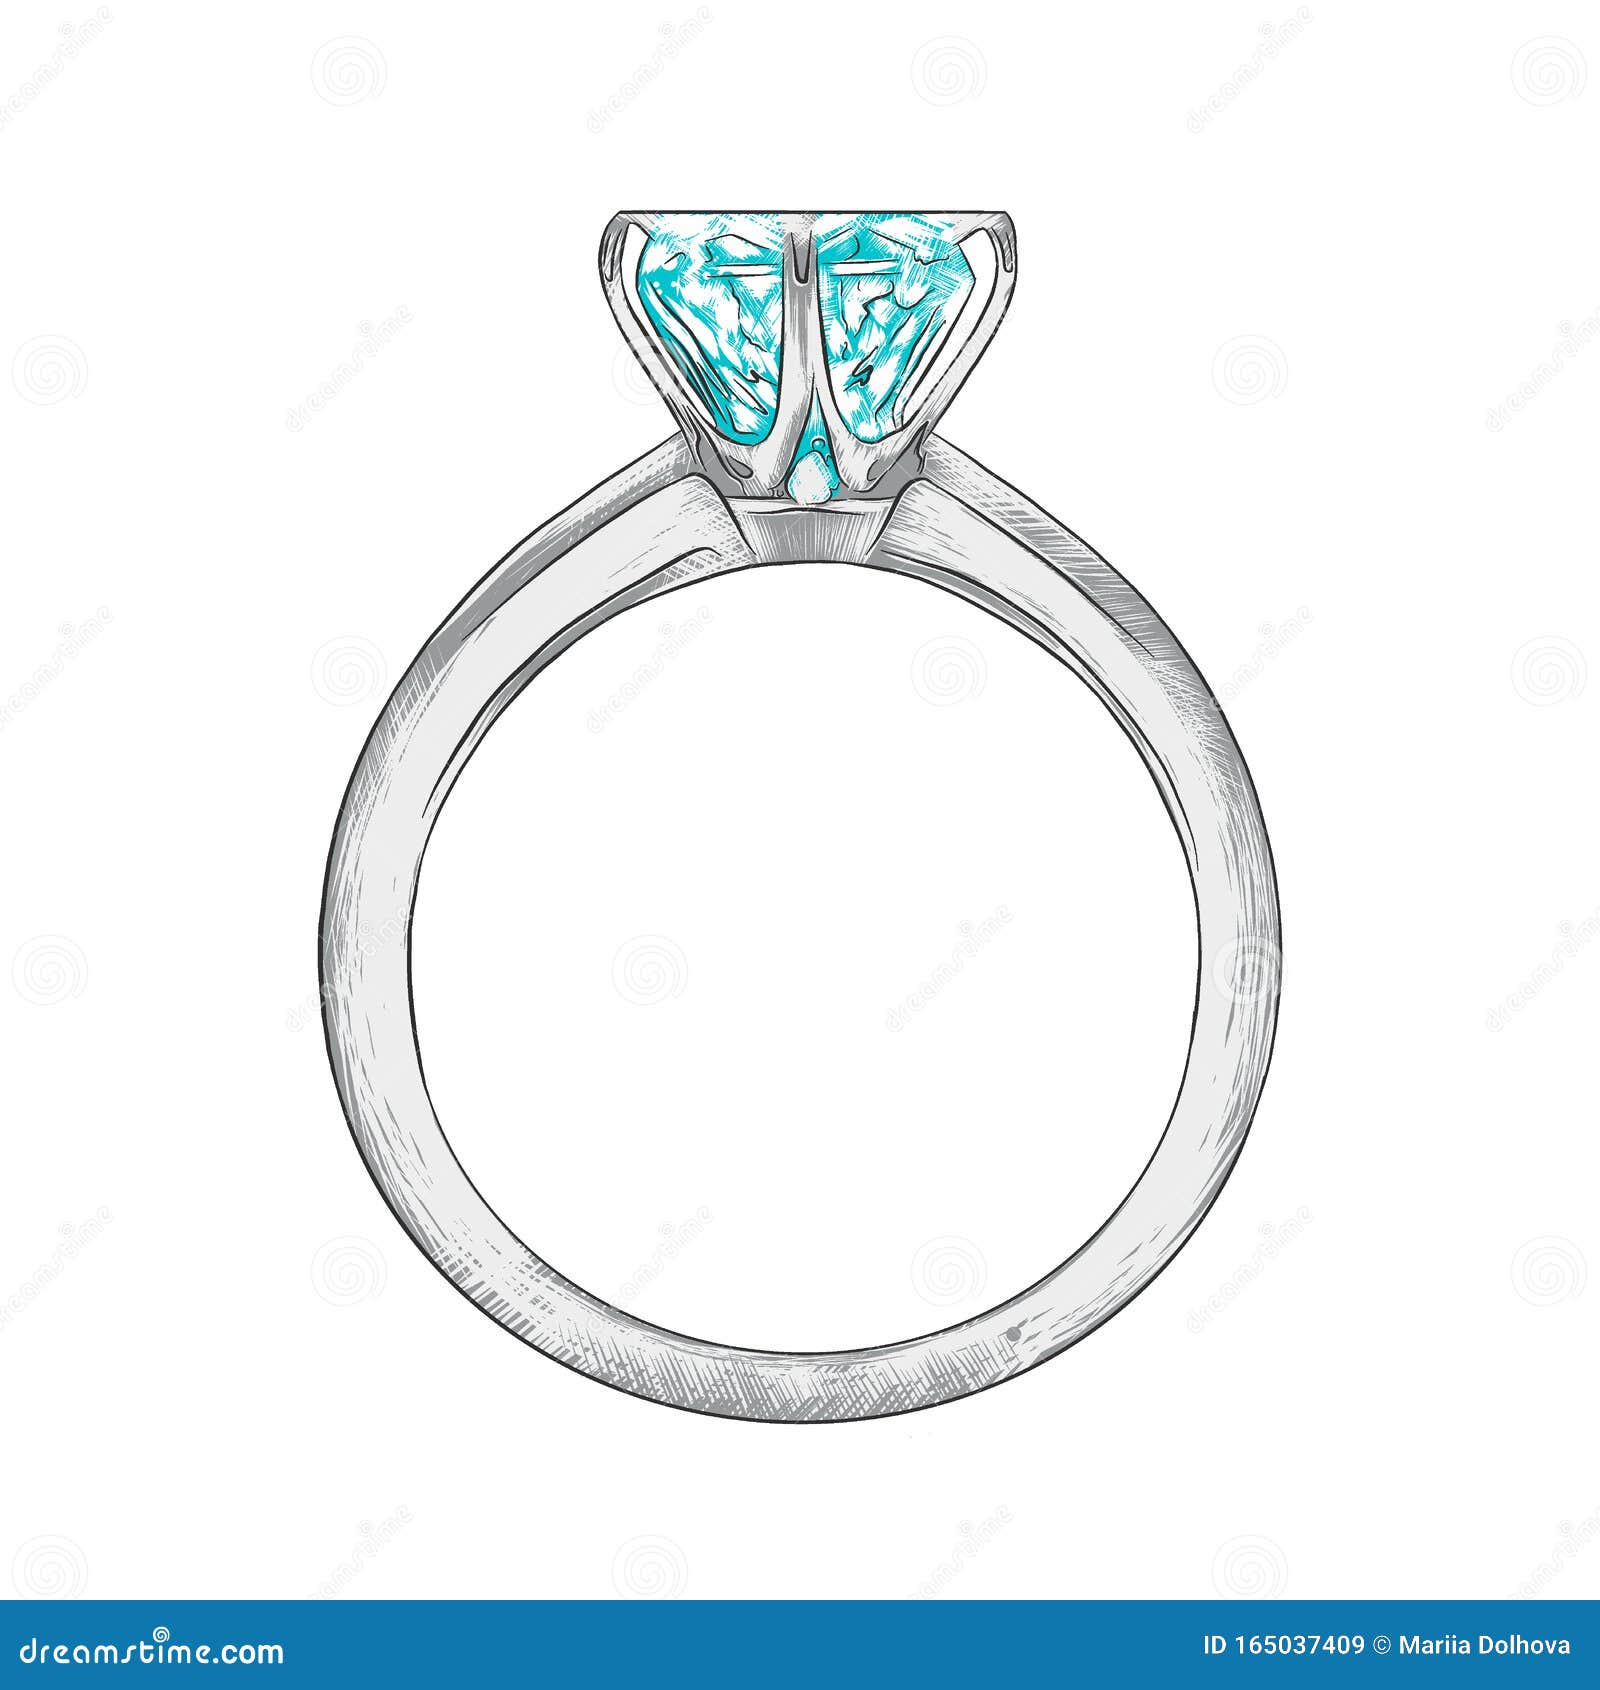 My drawing of a diamond ring : r/EngagementRings